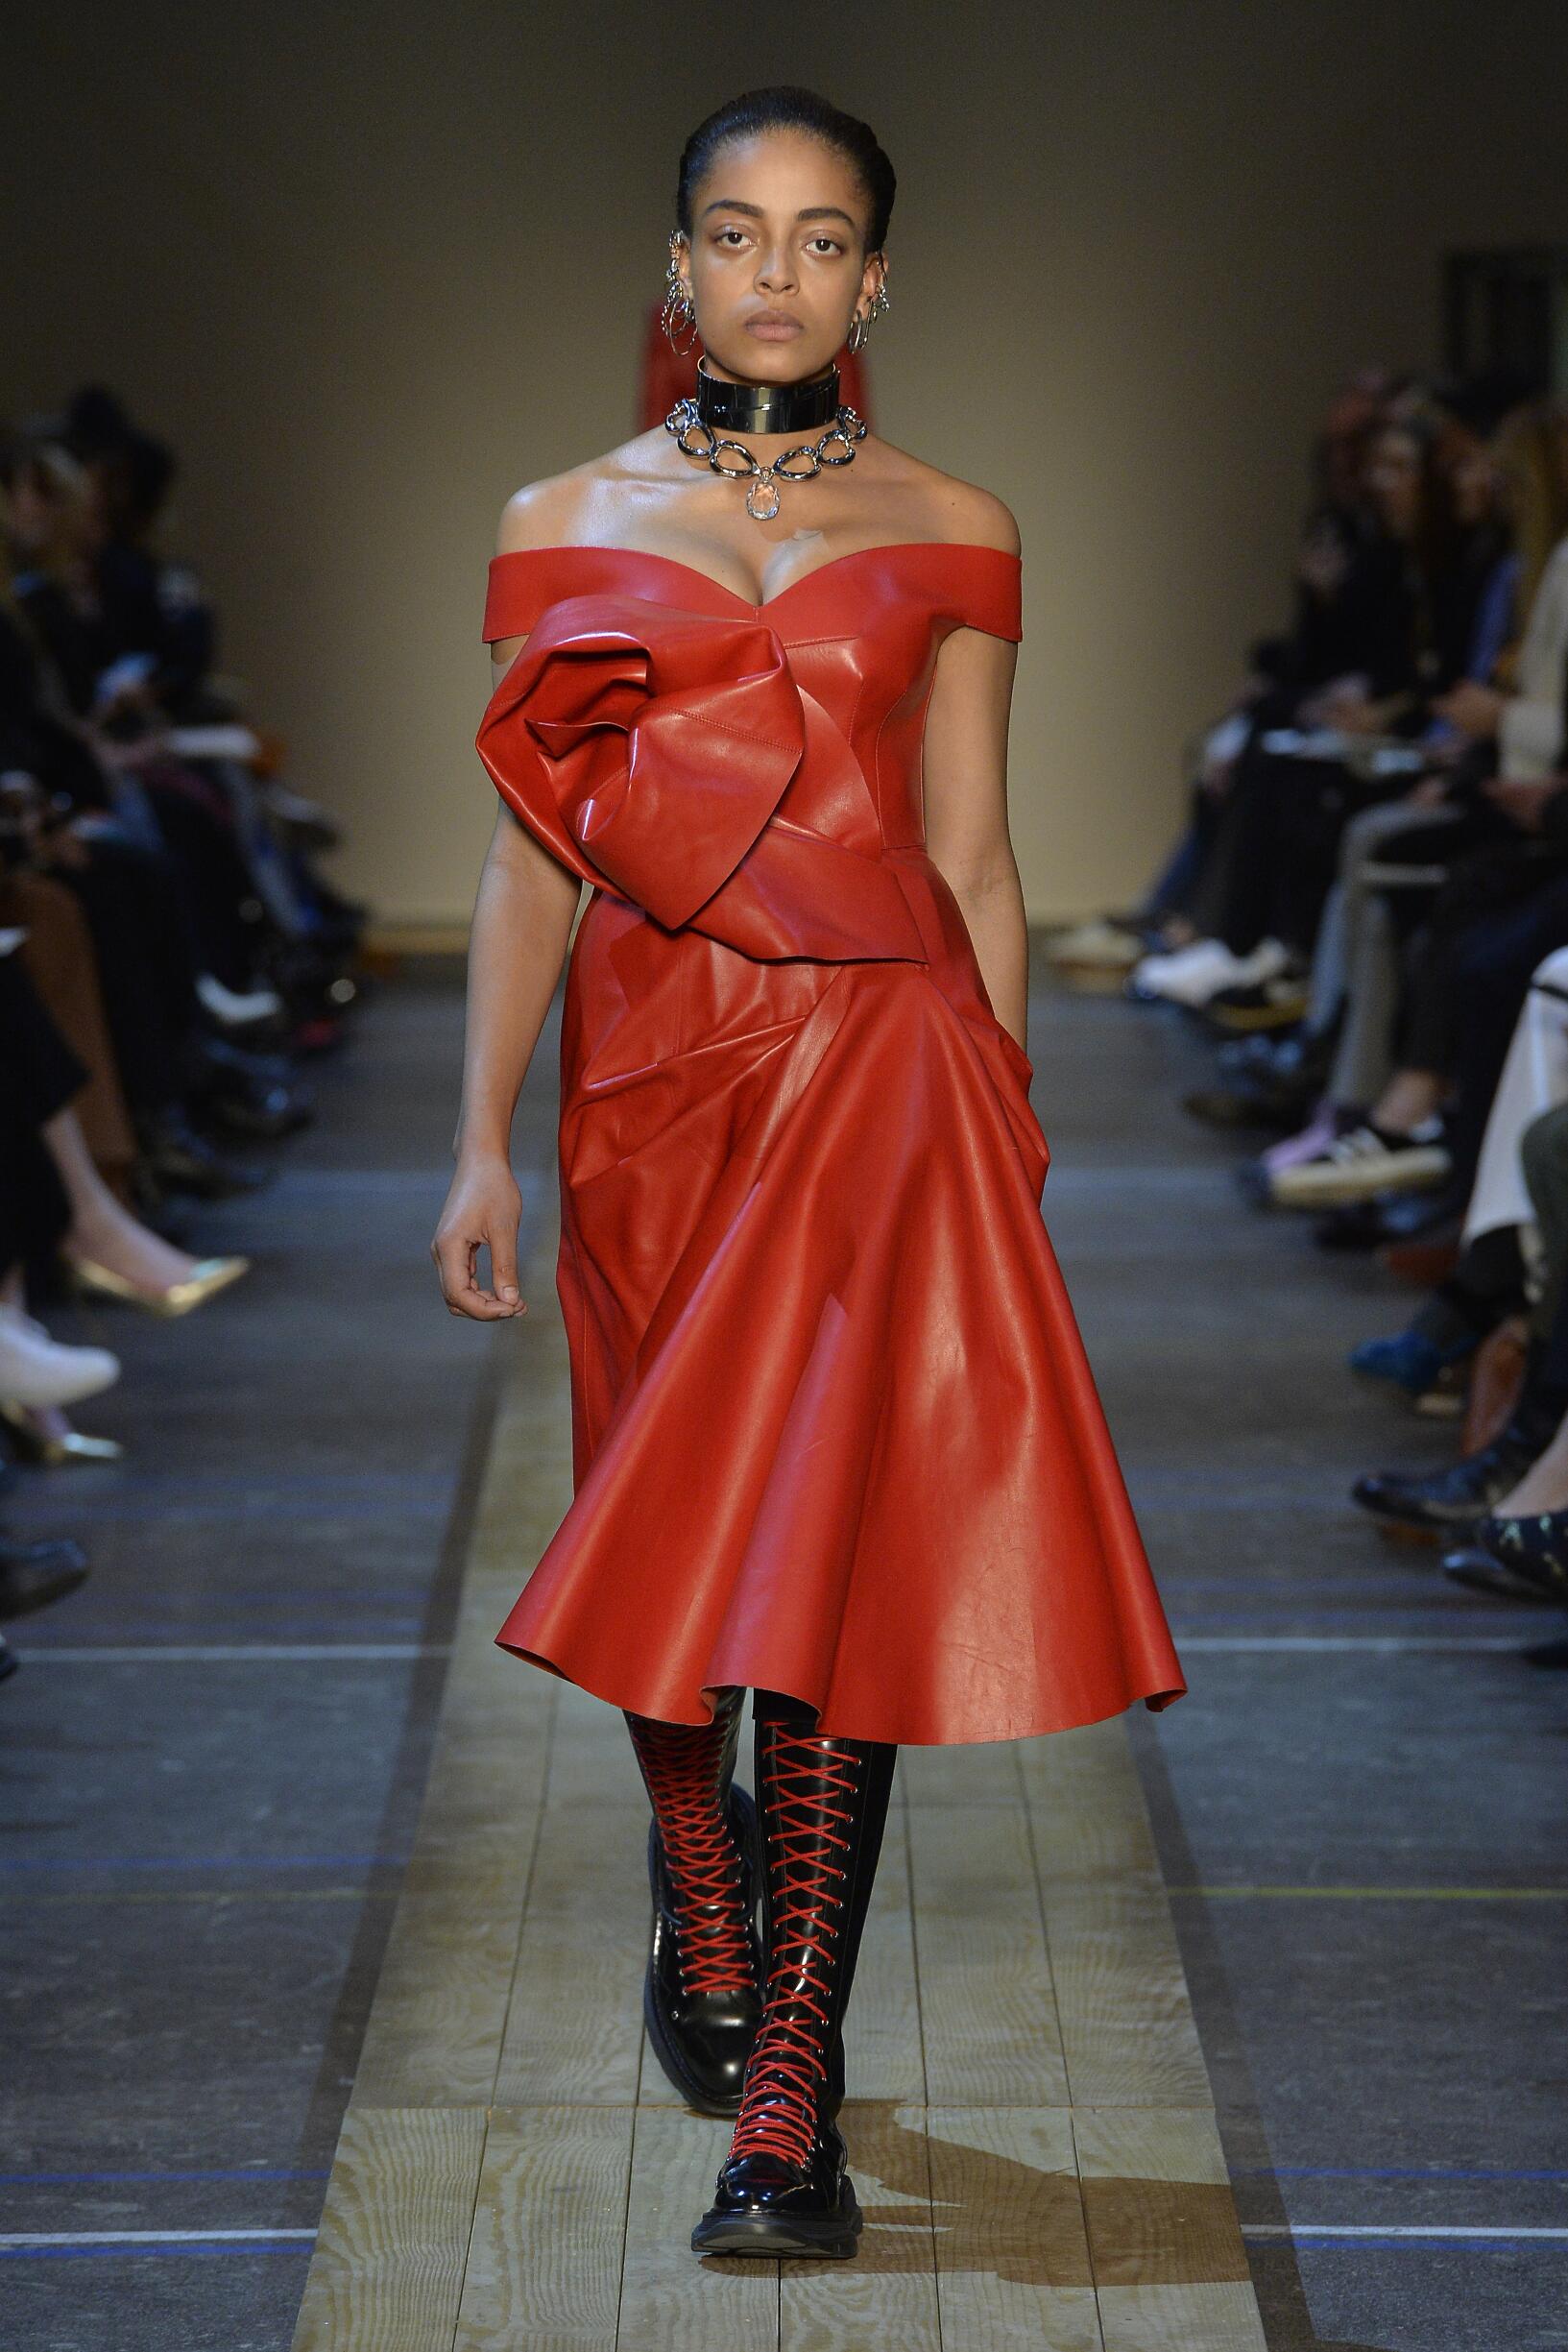 ALEXANDER MCQUEEN FALL WINTER 2019 WOMEN'S COLLECTION | The Skinny Beep